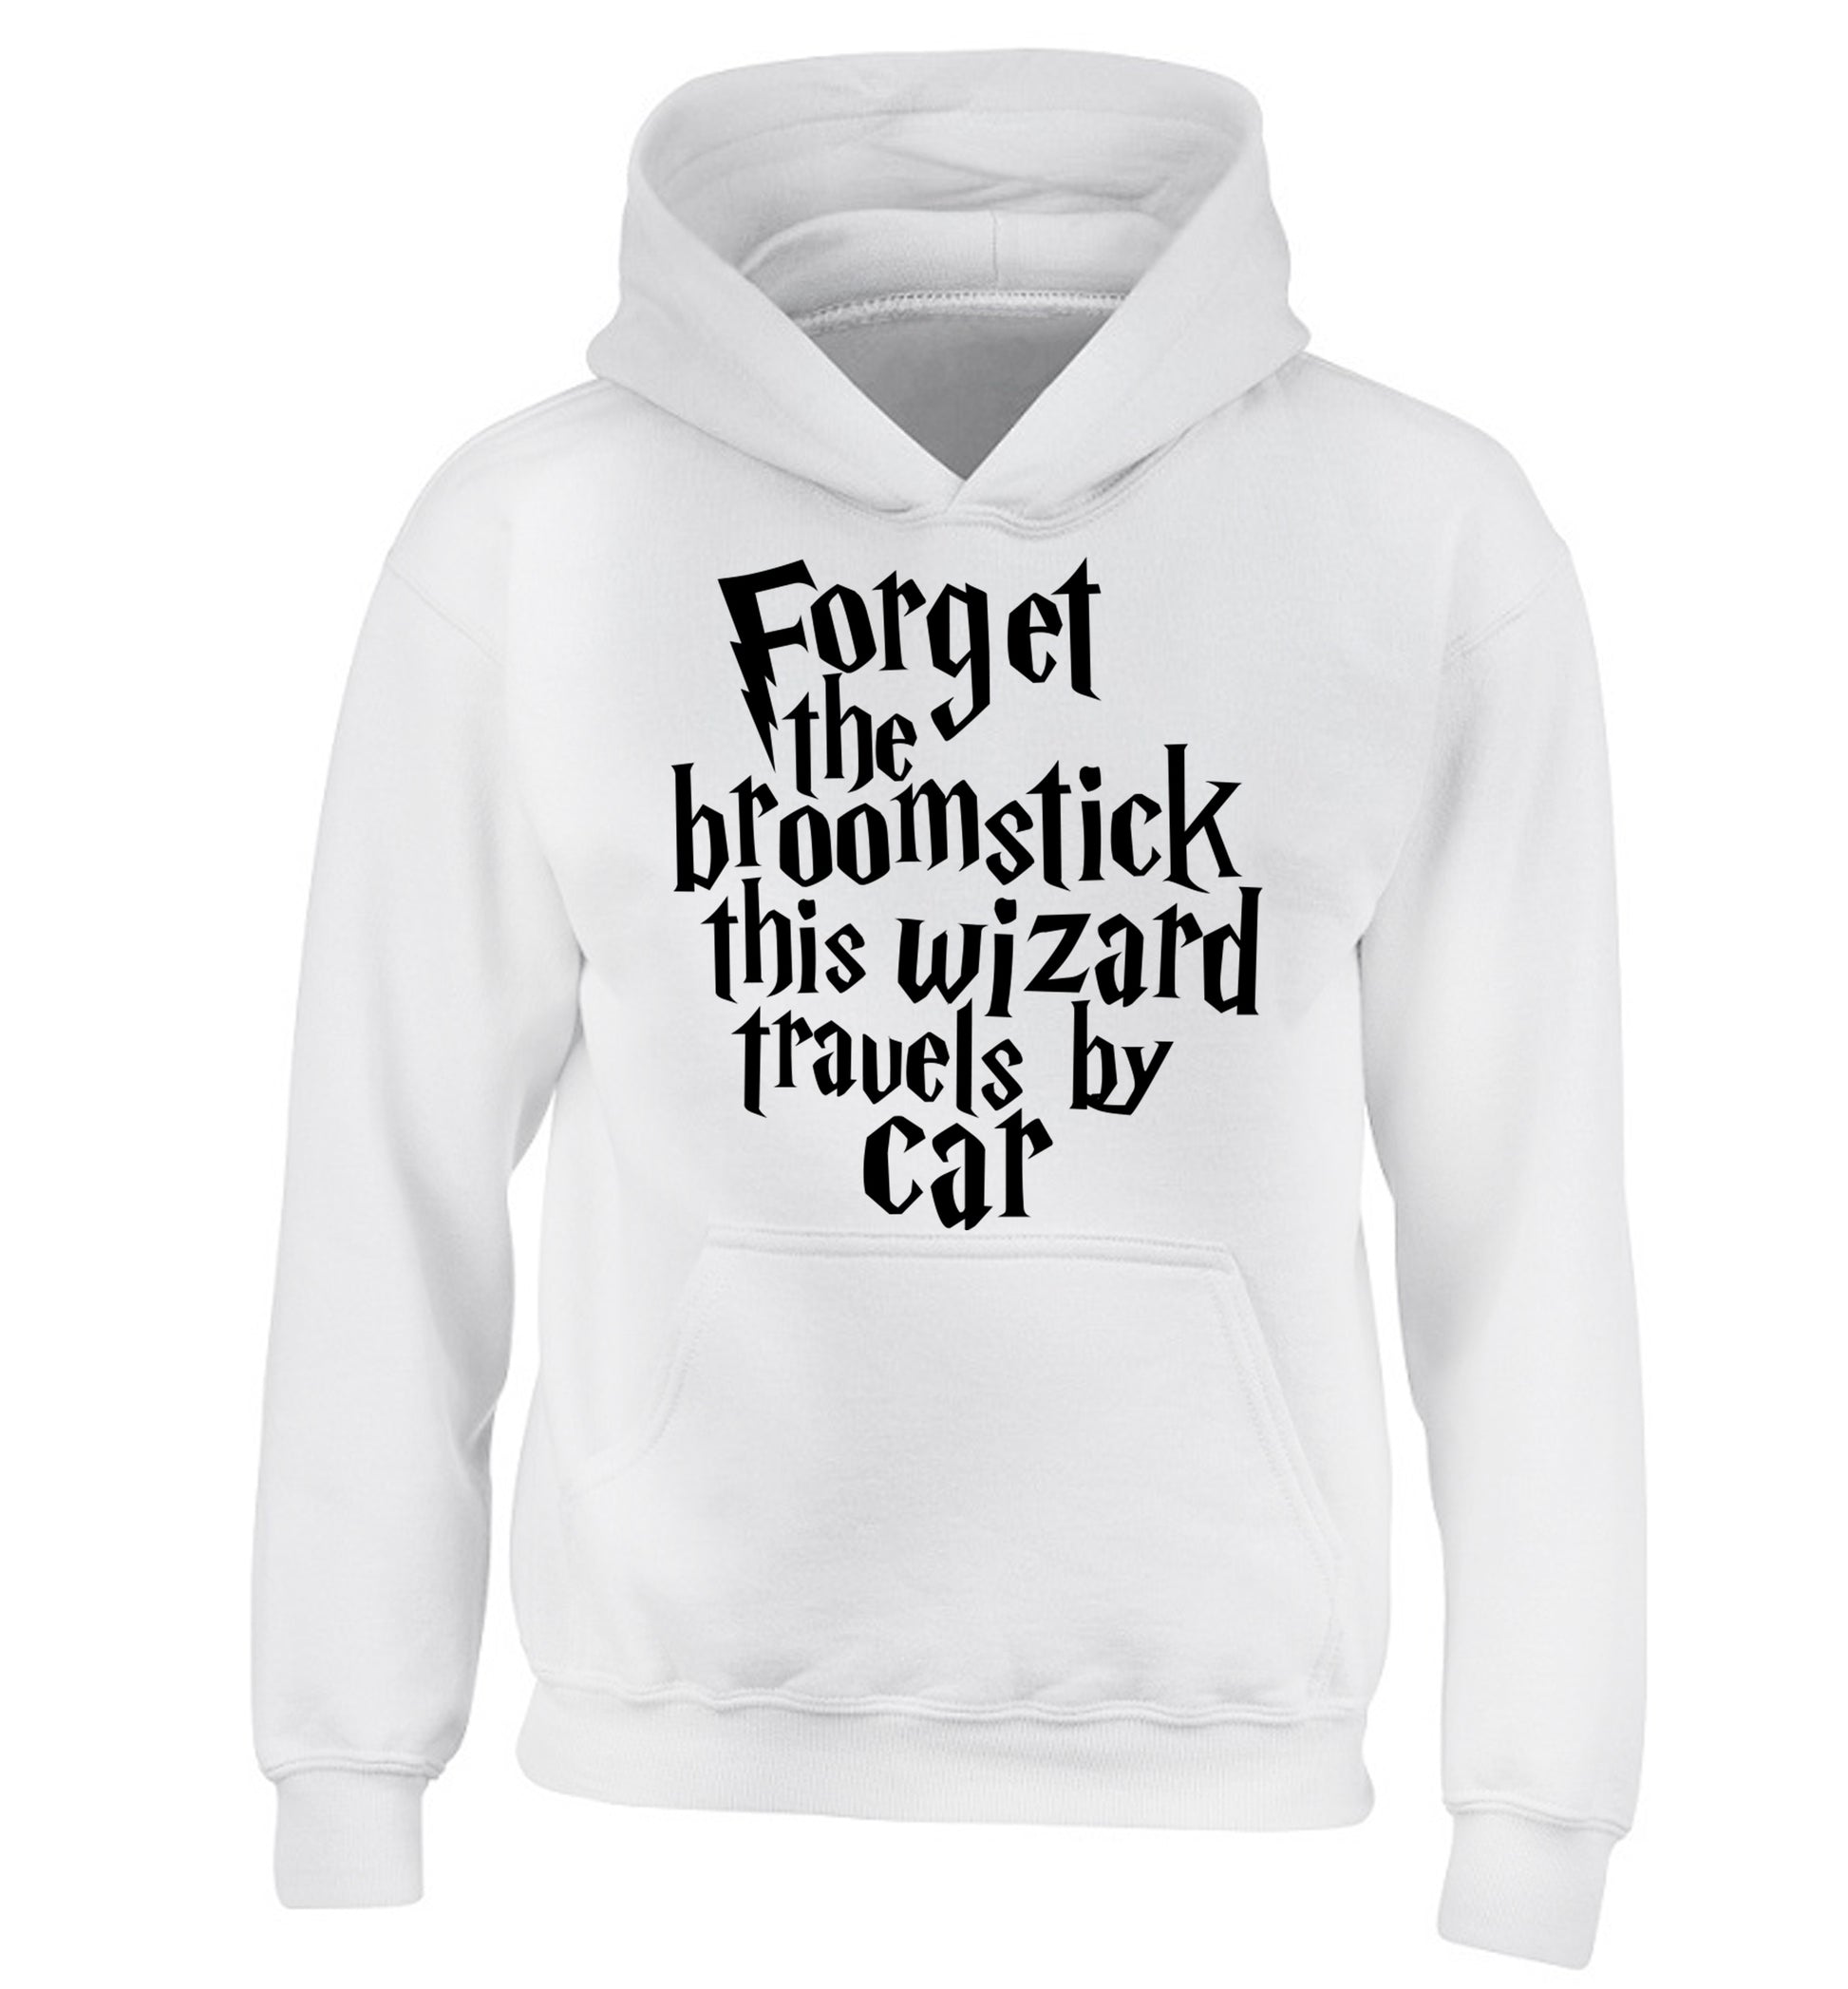 Forget the broomstick this wizard travels by car children's white hoodie 12-14 Years